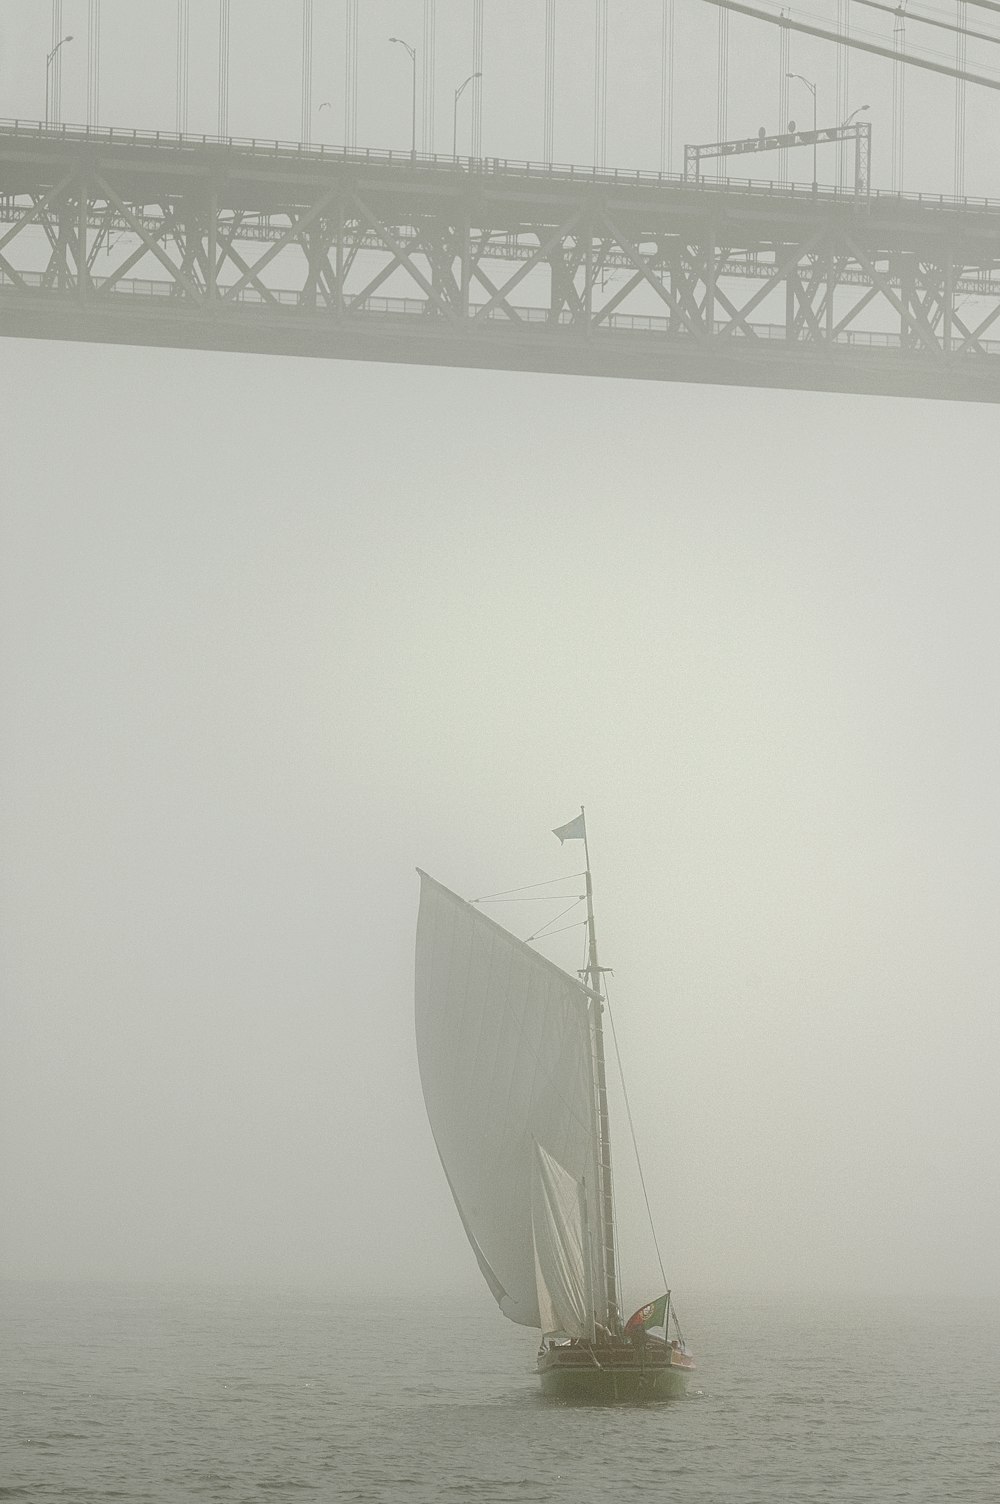 white sail boat on sea during foggy weather